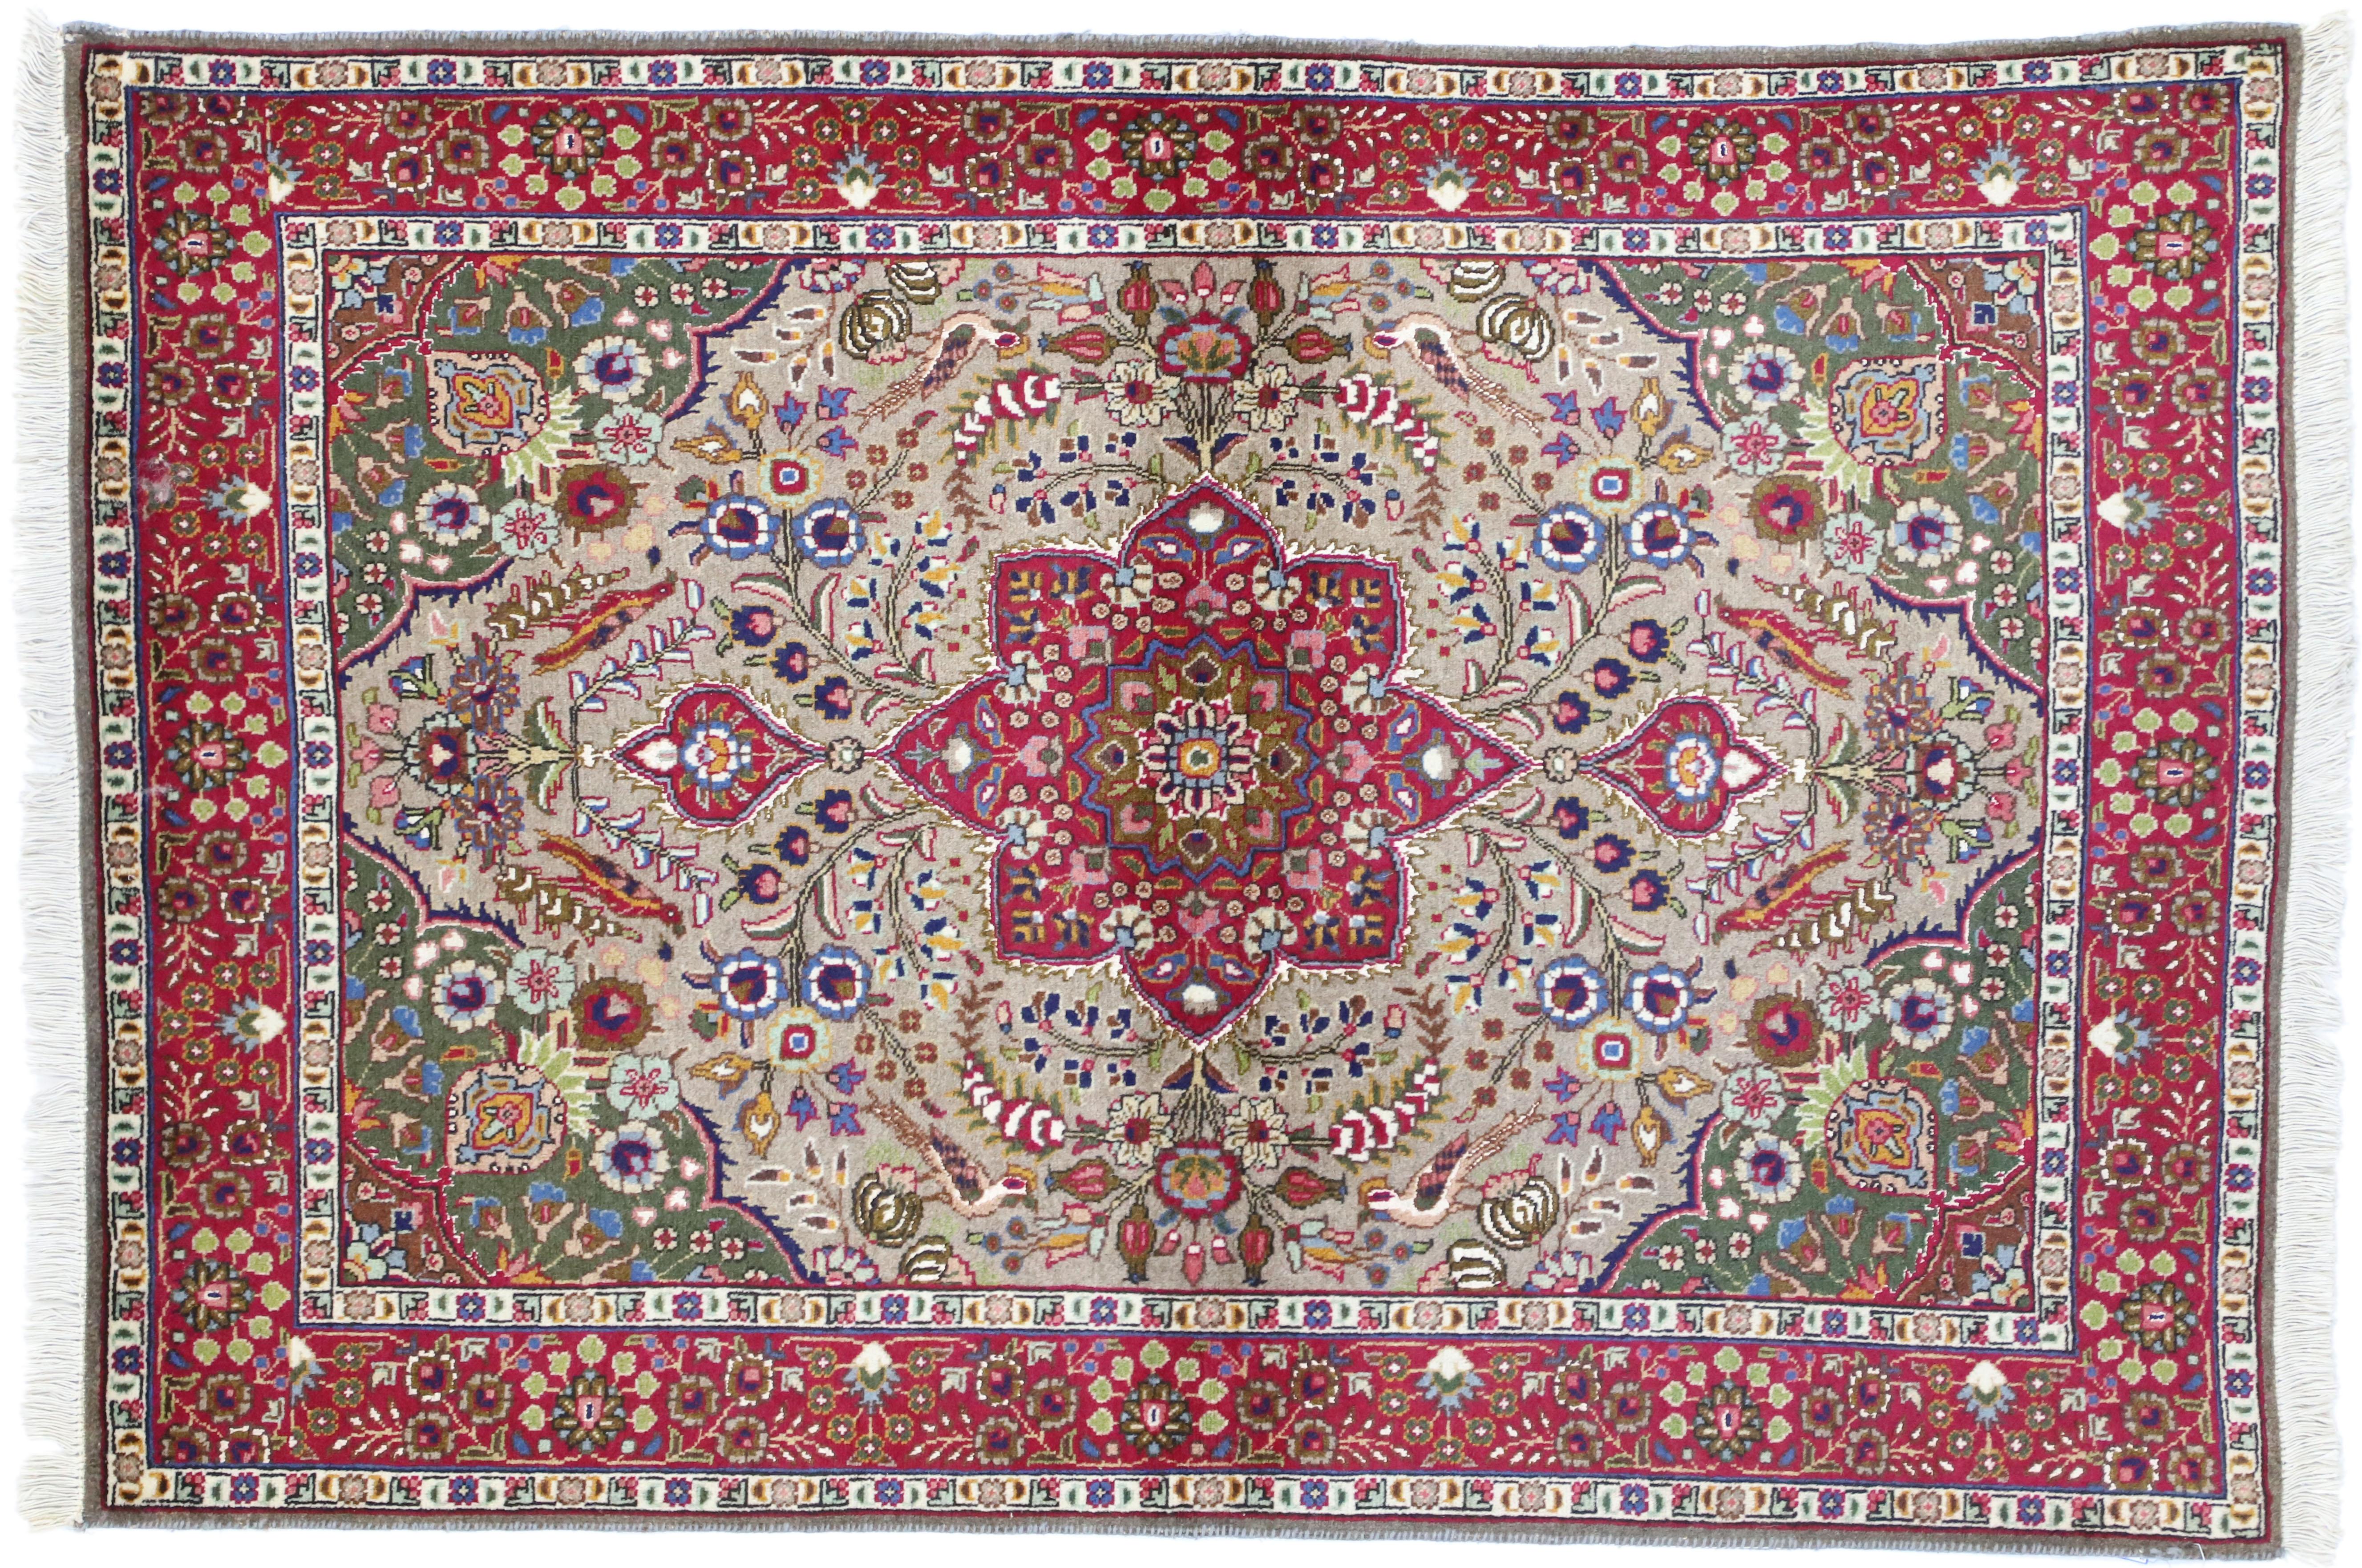 Vintage Persian Tabriz Medallion Rug with Rustic Feminine Arts & Crafts Style In Good Condition For Sale In Dallas, TX